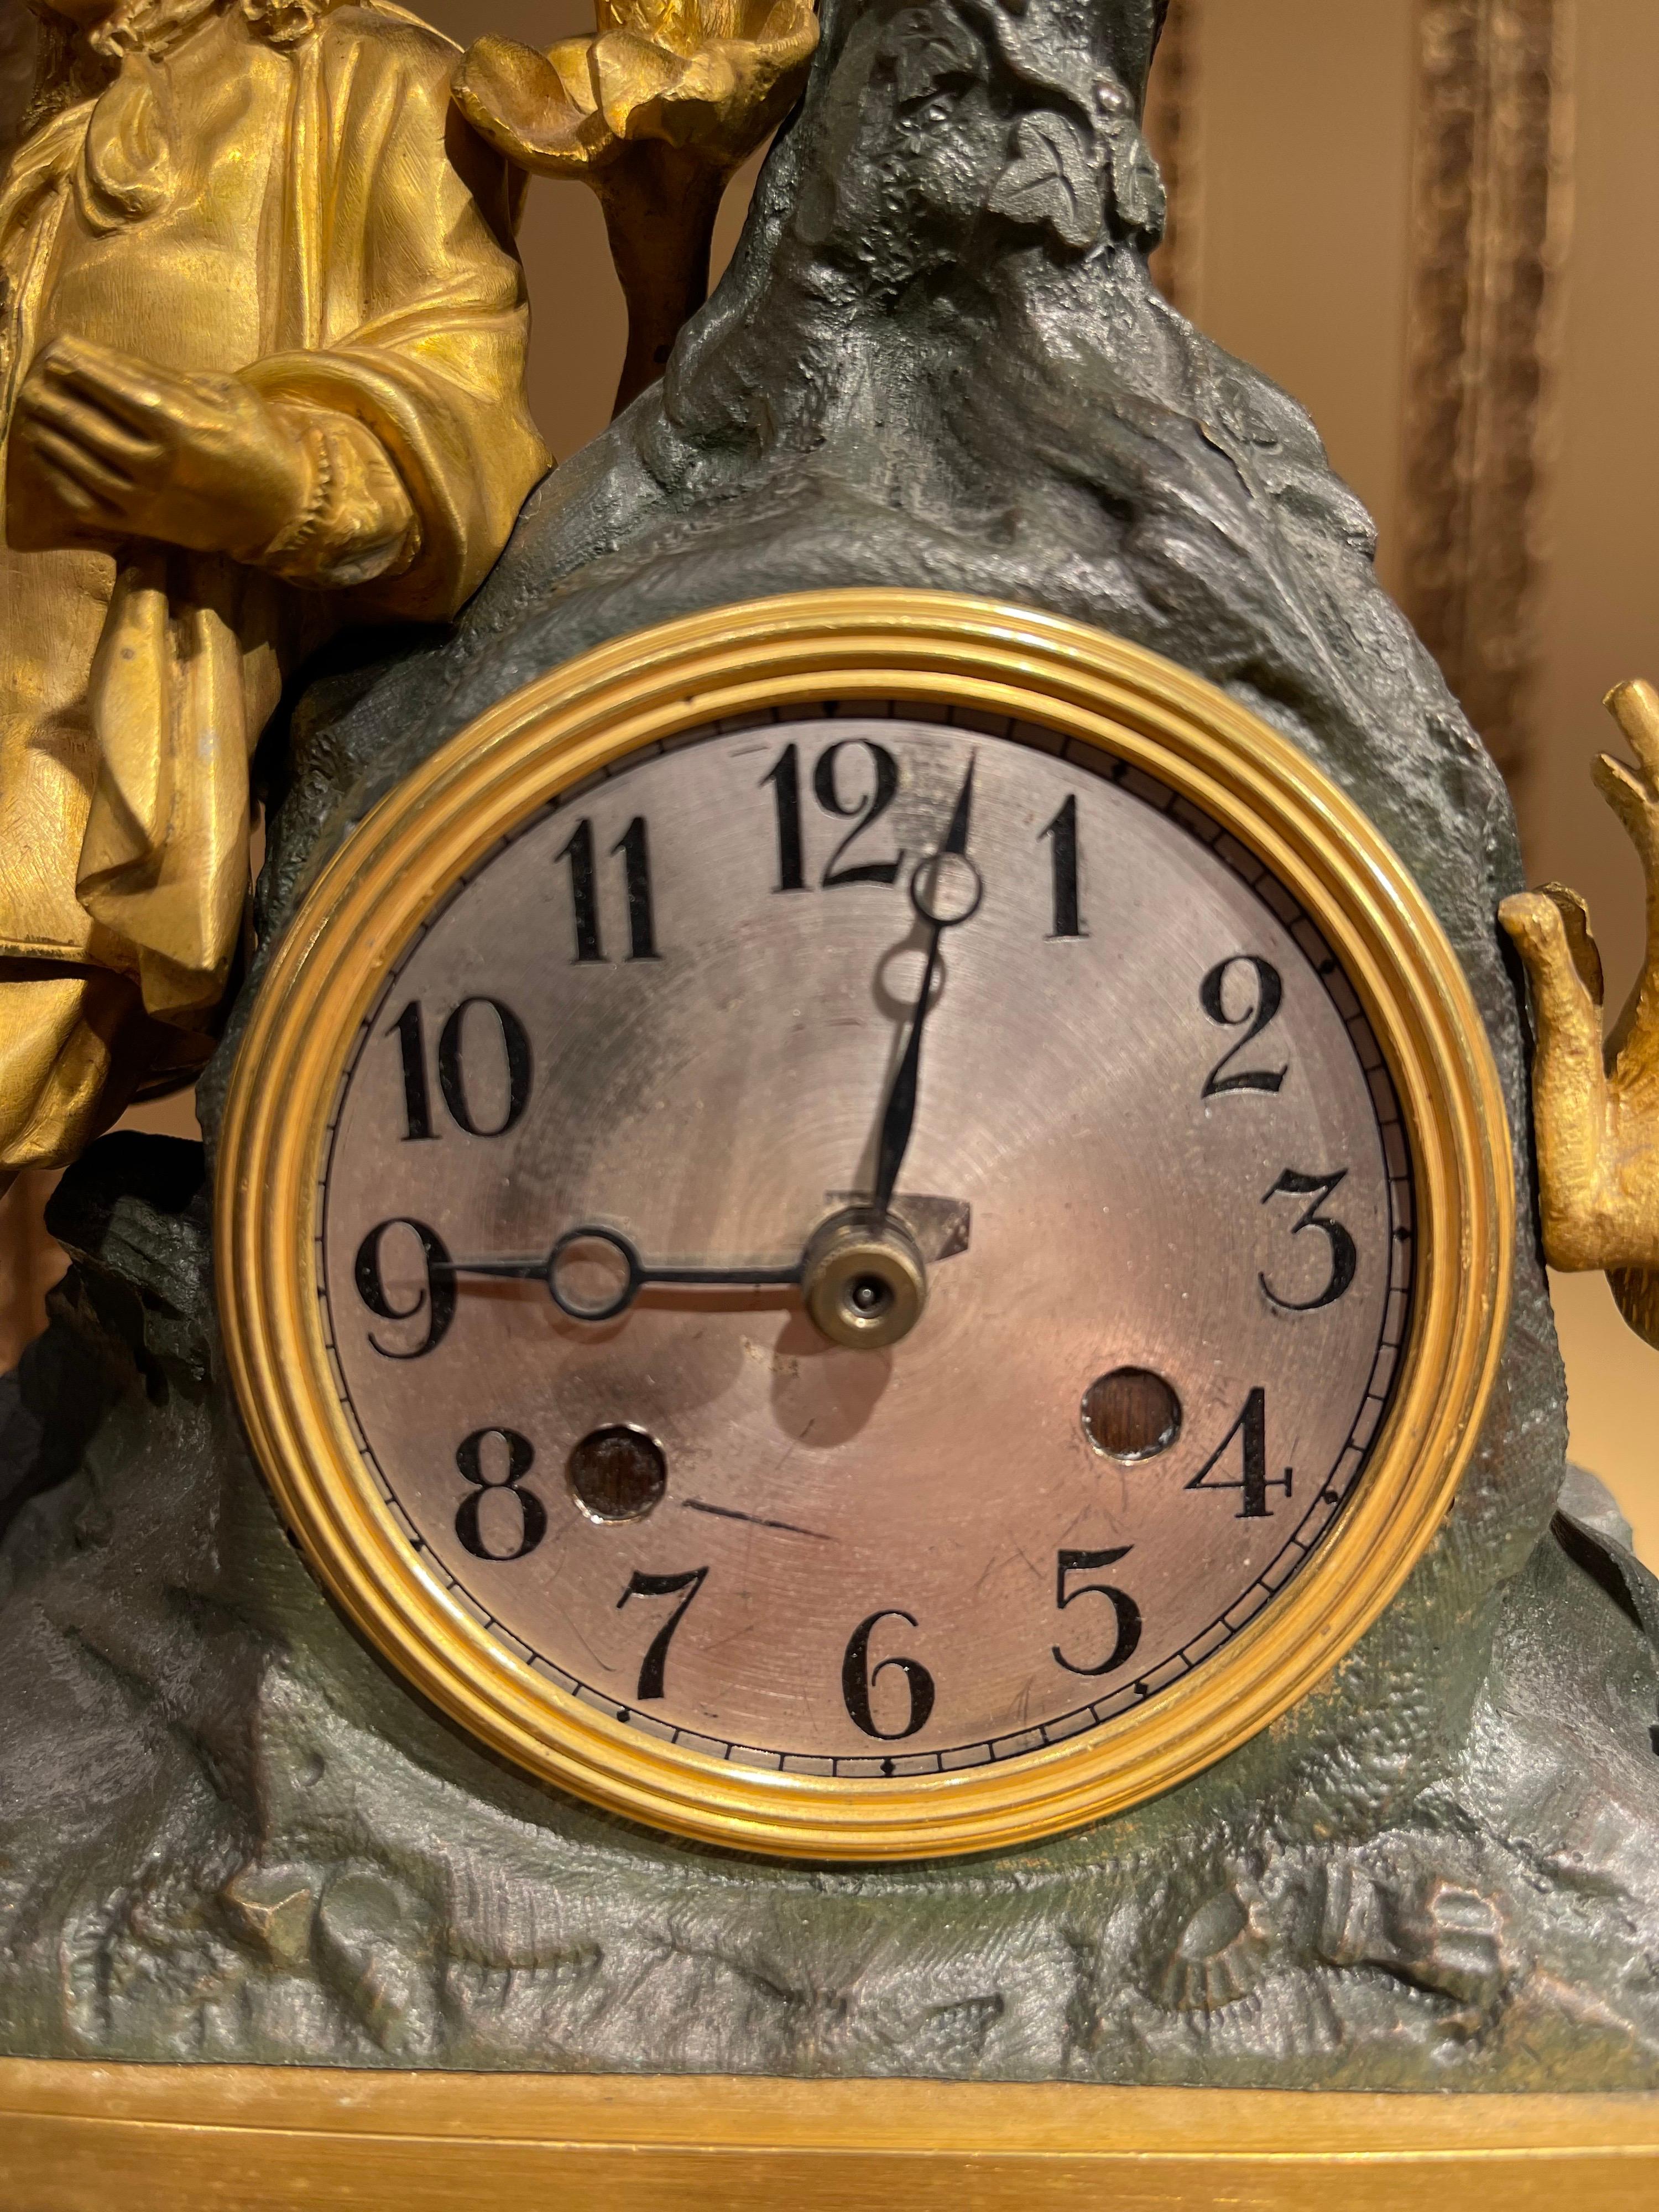 Antique Mantel Clock from around 1850, France, Fire-Gilded For Sale 2